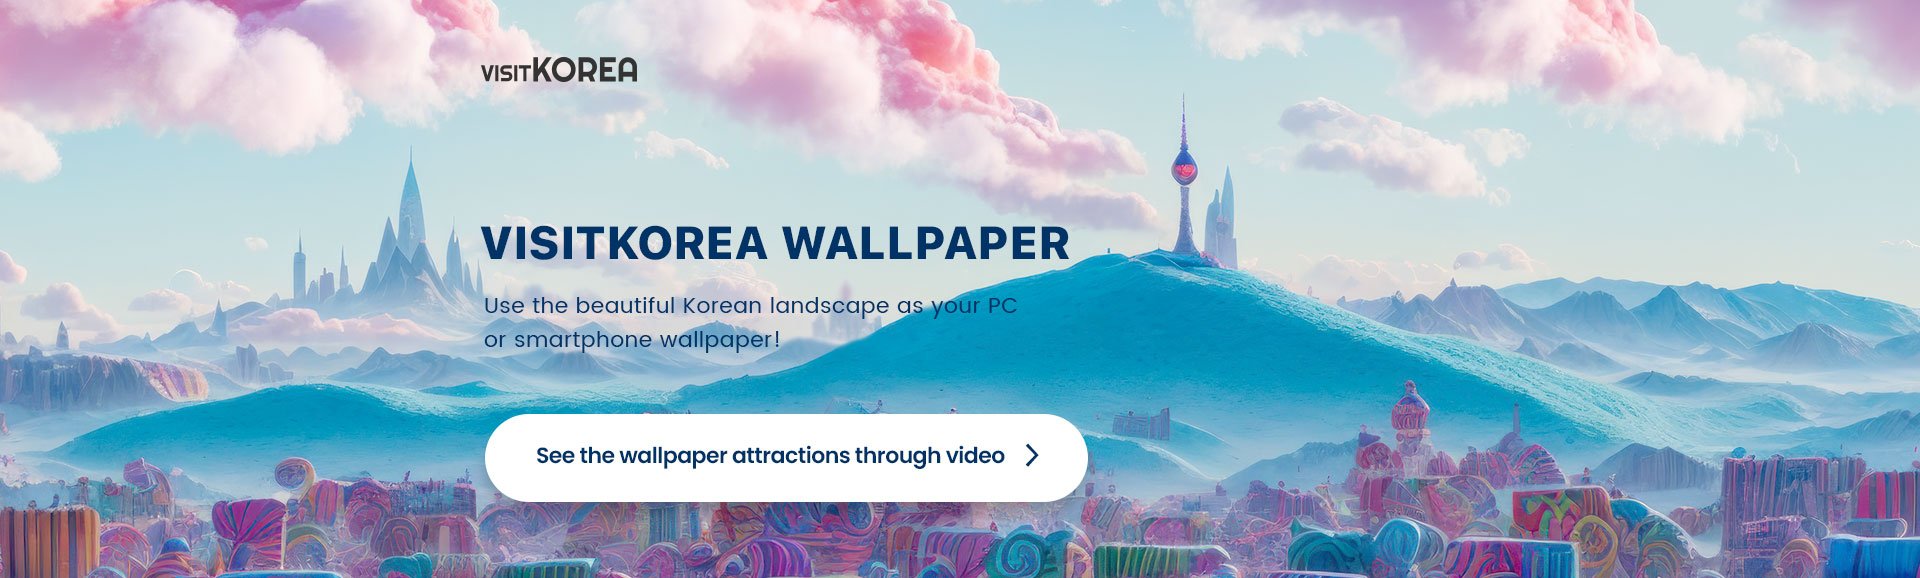 VISITKOREA WALLPAPER Use the beautiful Korean landscape as your PC, smartphone, or tablet wallpaper!